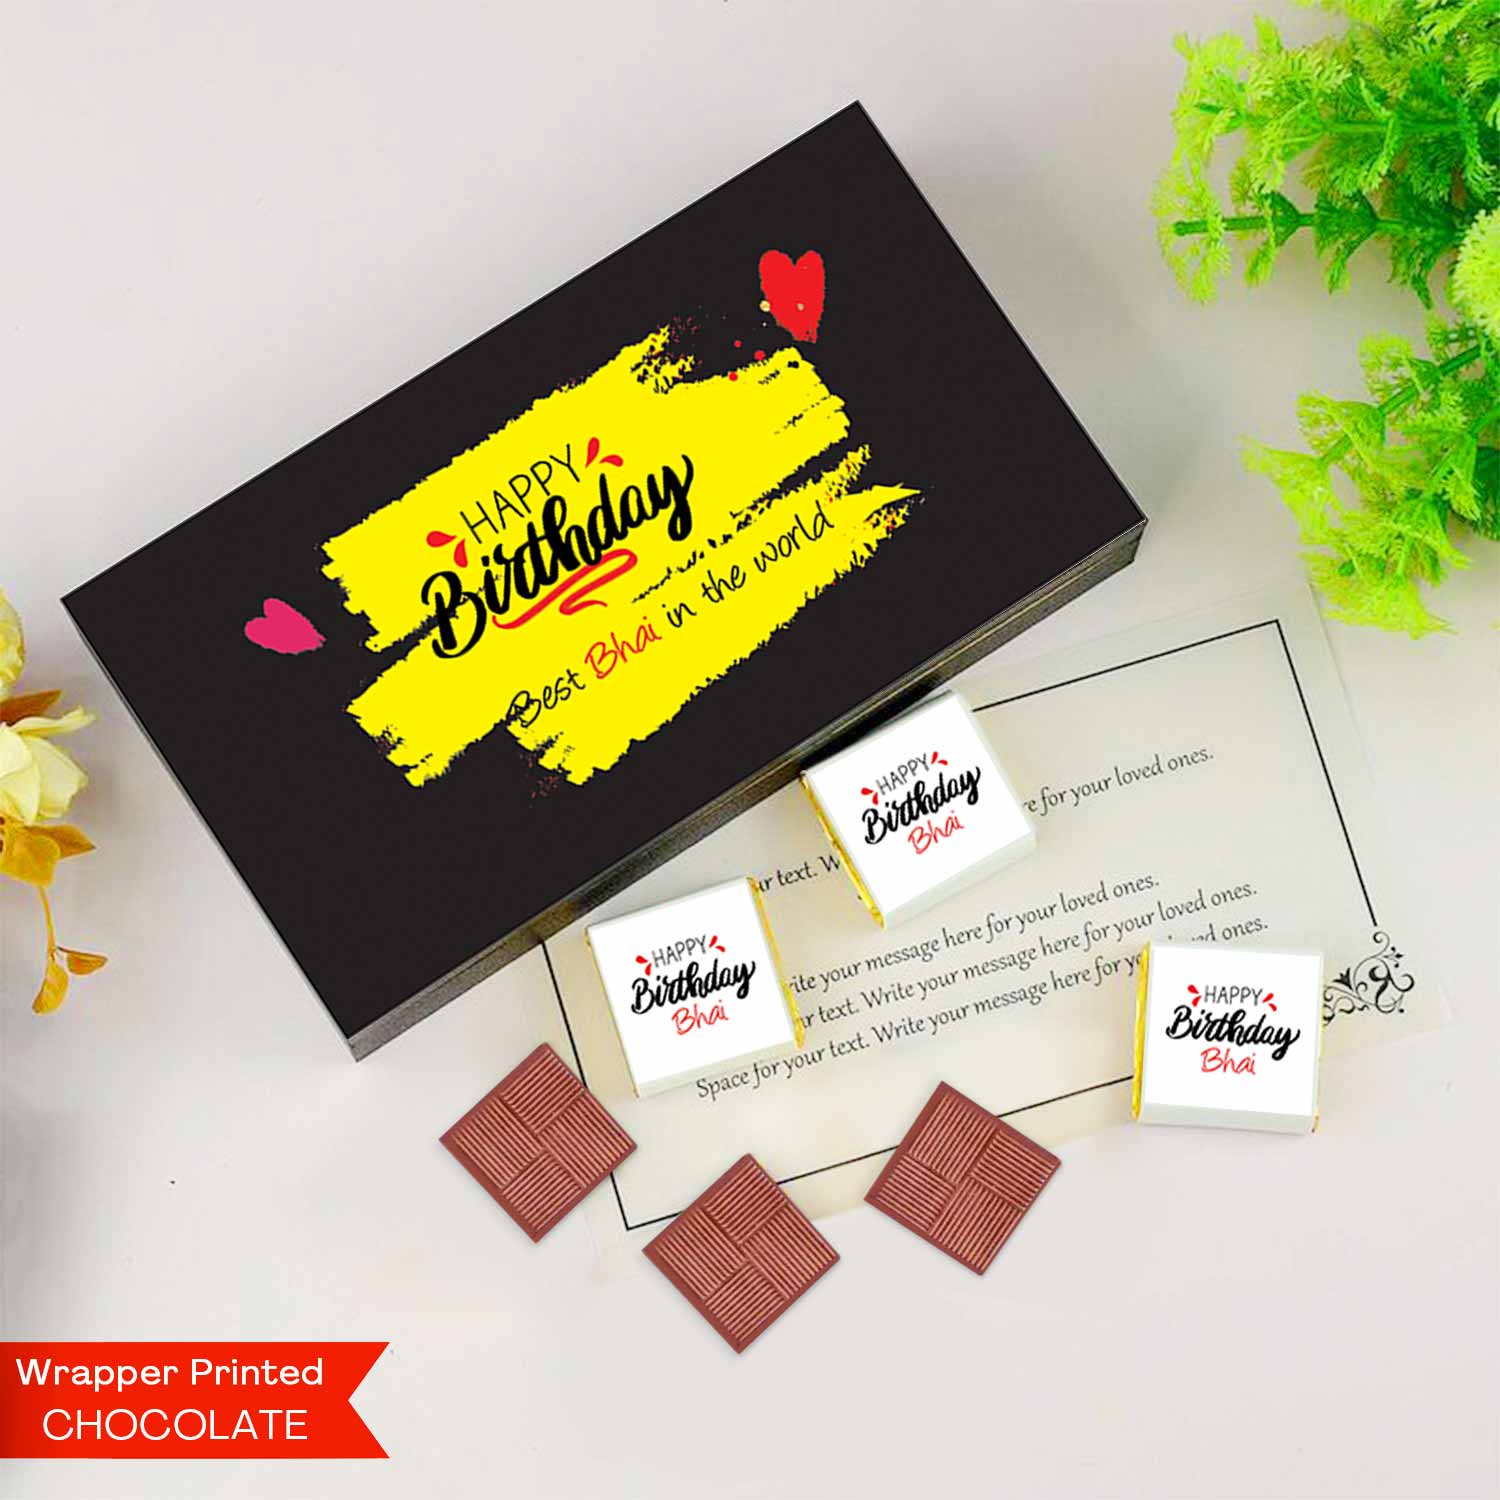 personalised chocolate wrappers personalised chocolate wrappers near me personalised chocolate gift box personalised chocolates with names customised chocolate gifts personalised chocolates for birthdays personalised chocolates with photo customized chocolate wrappers india